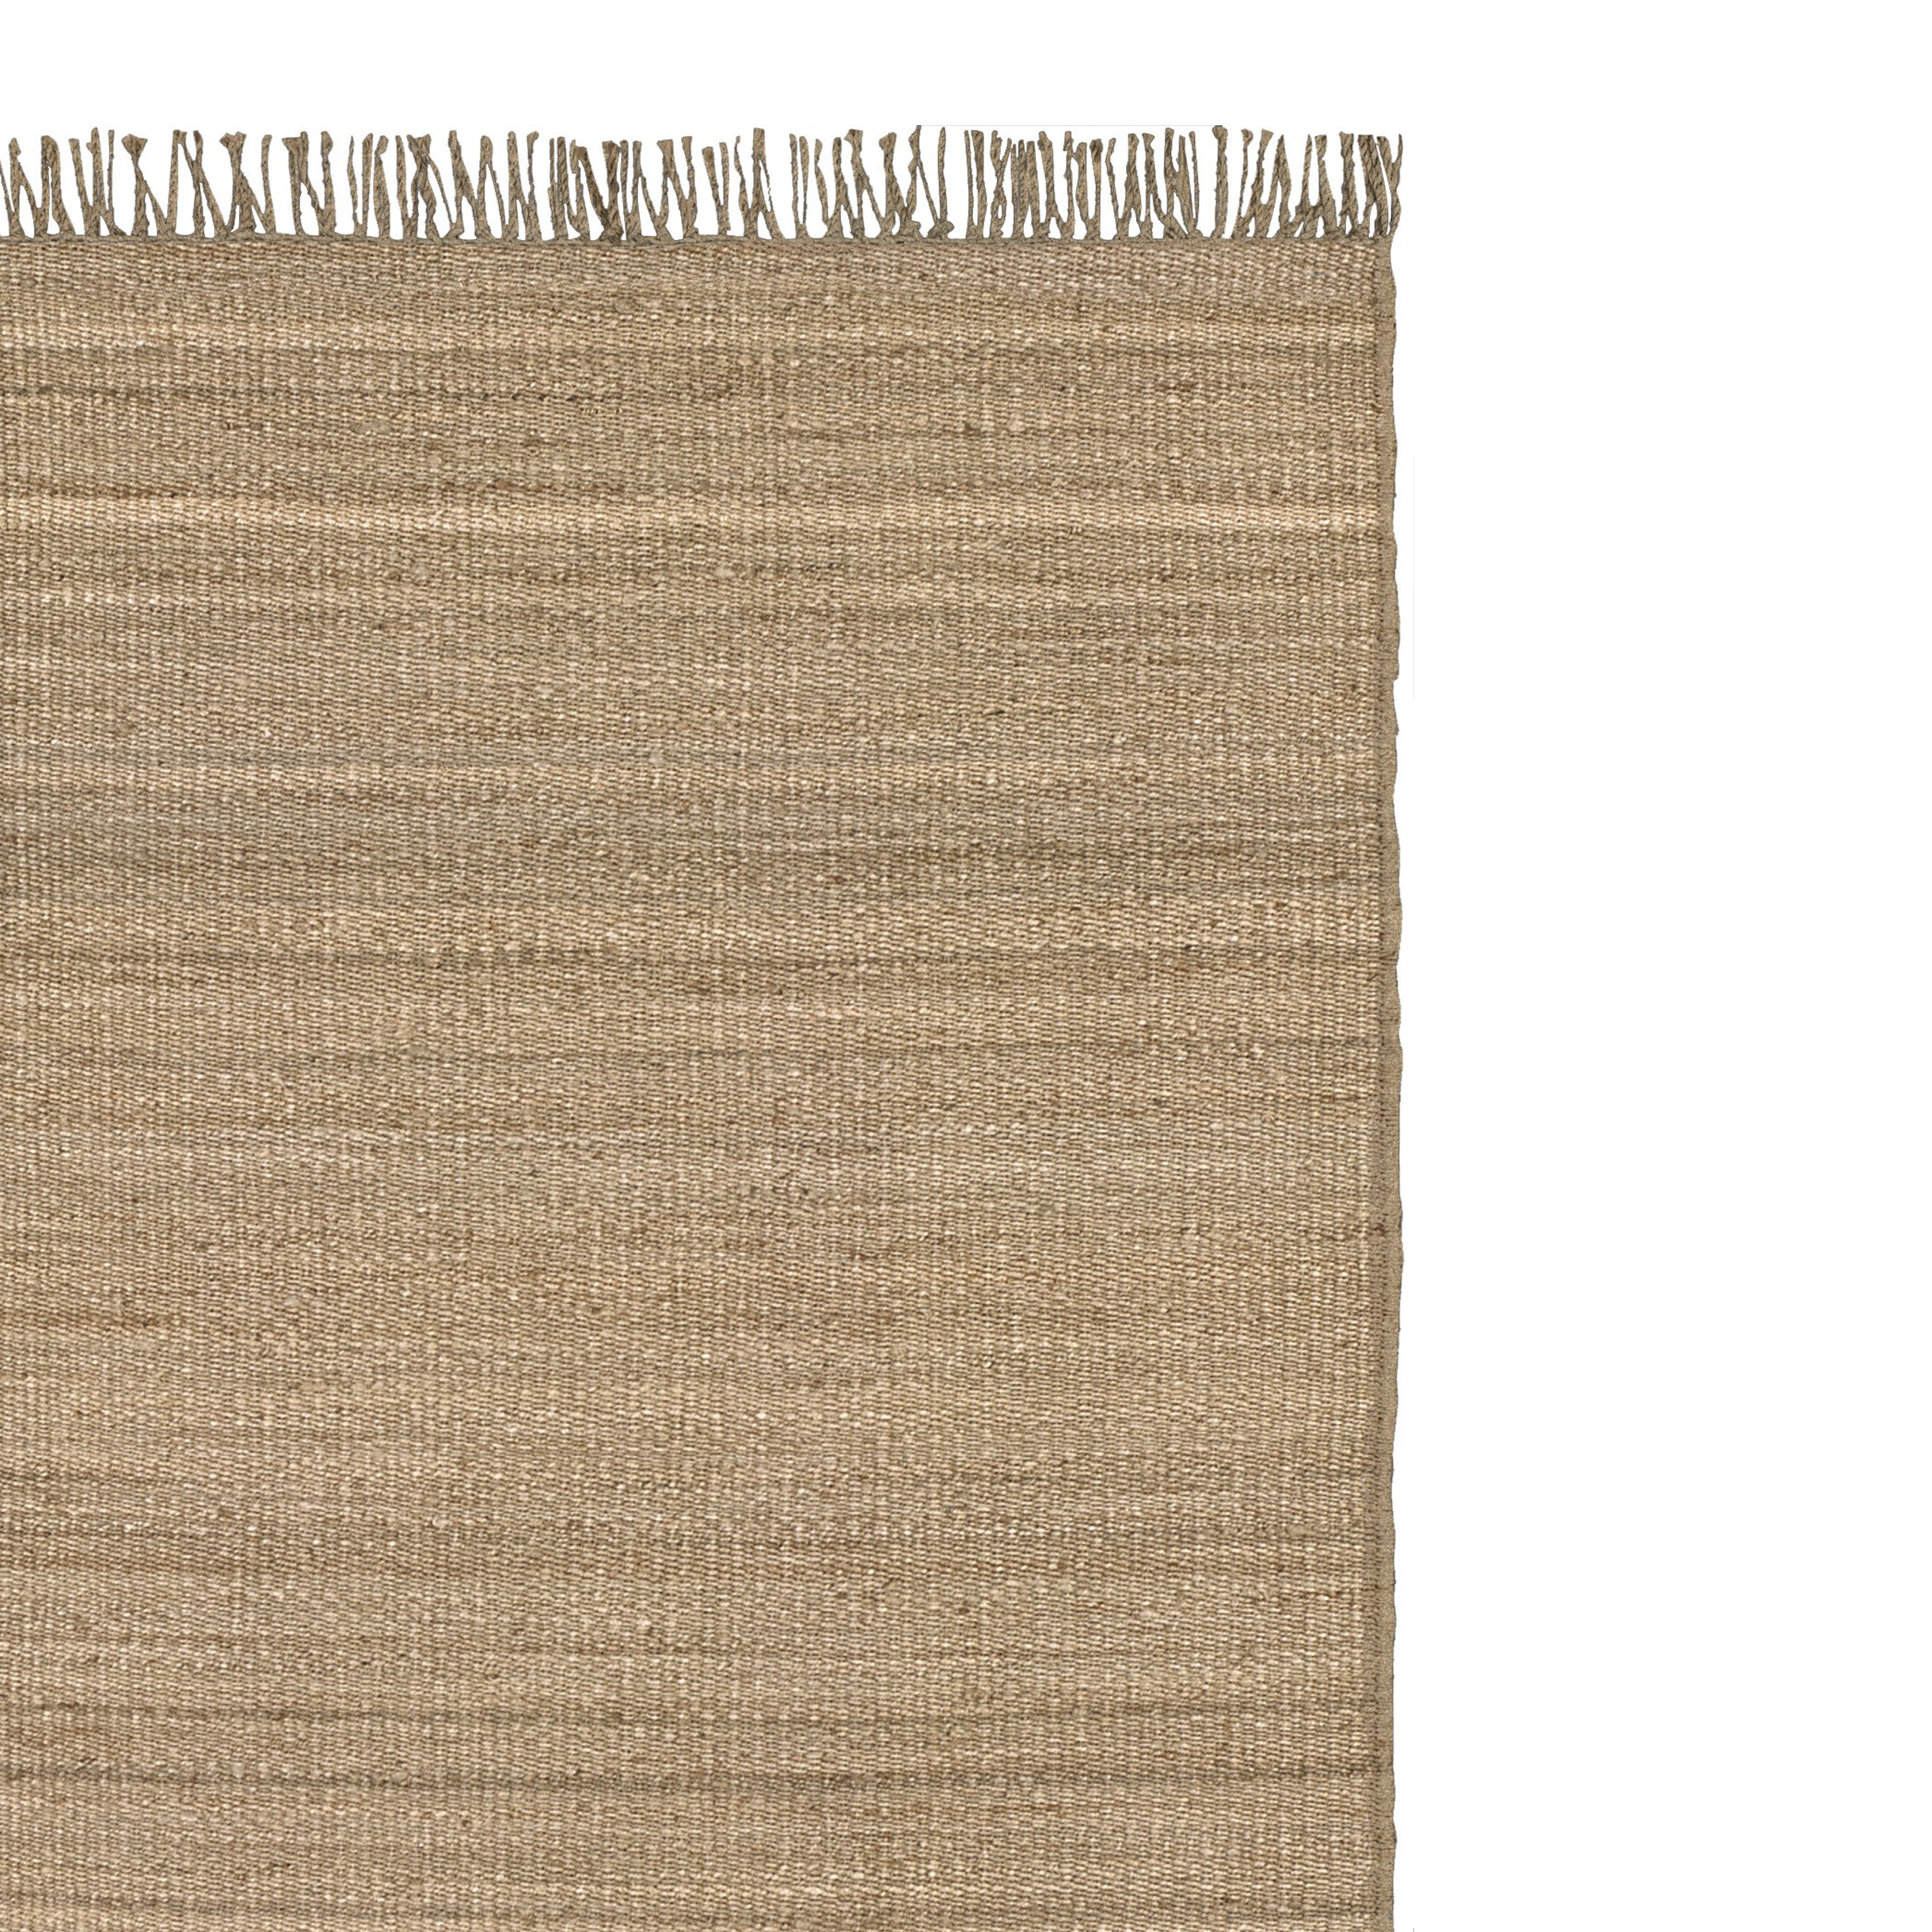 How to Take Care of a Jute Rug